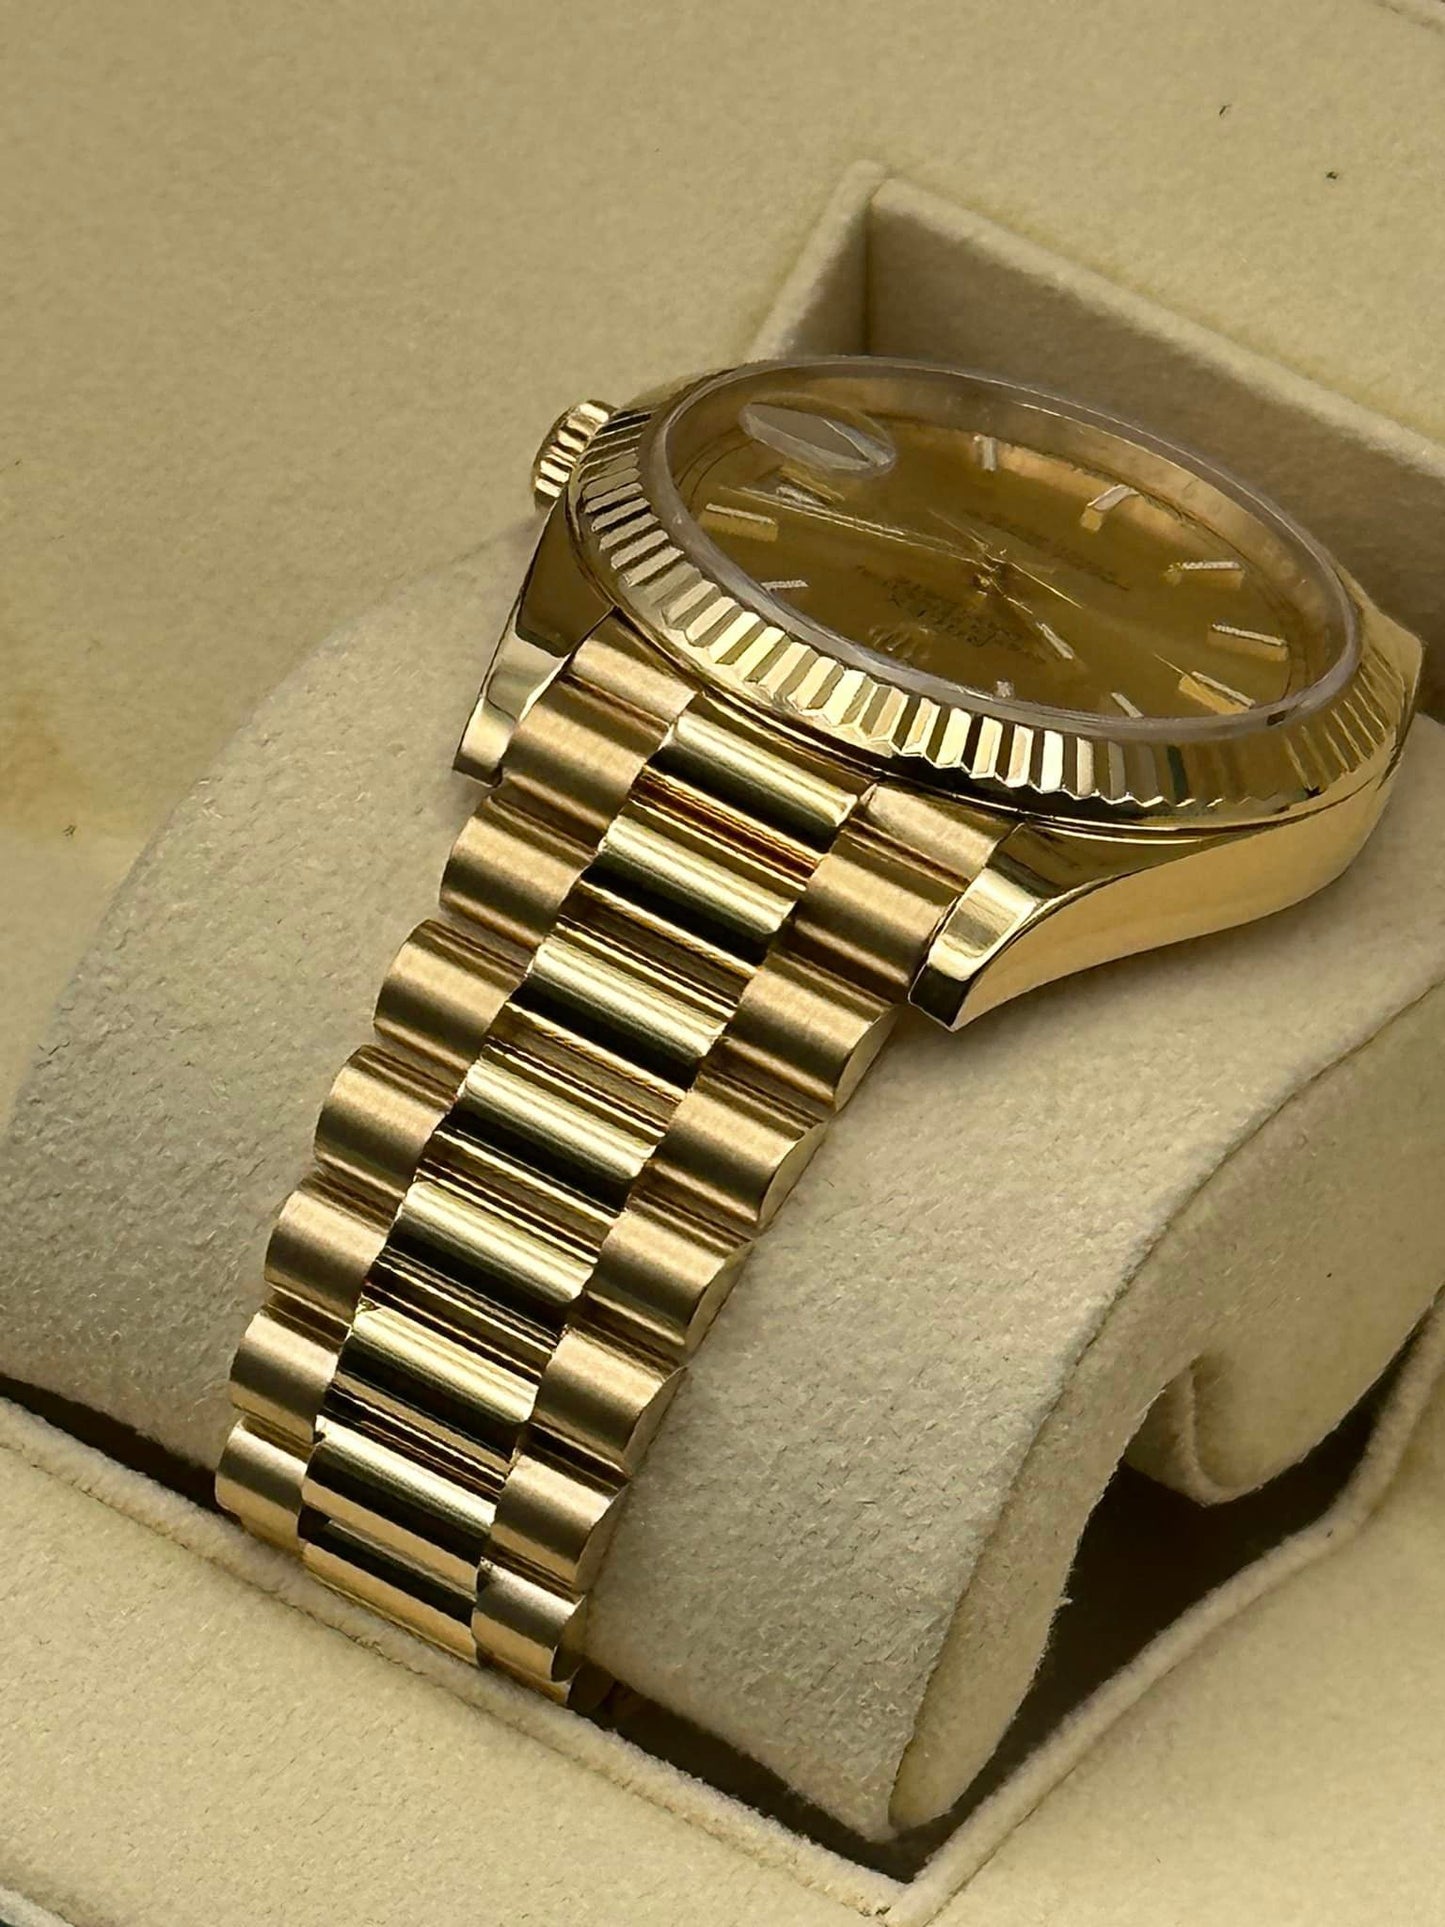 2020 Rolex Day-Date 40mm 228238 Yellow Gold Champagne Dial - MyWatchLLC